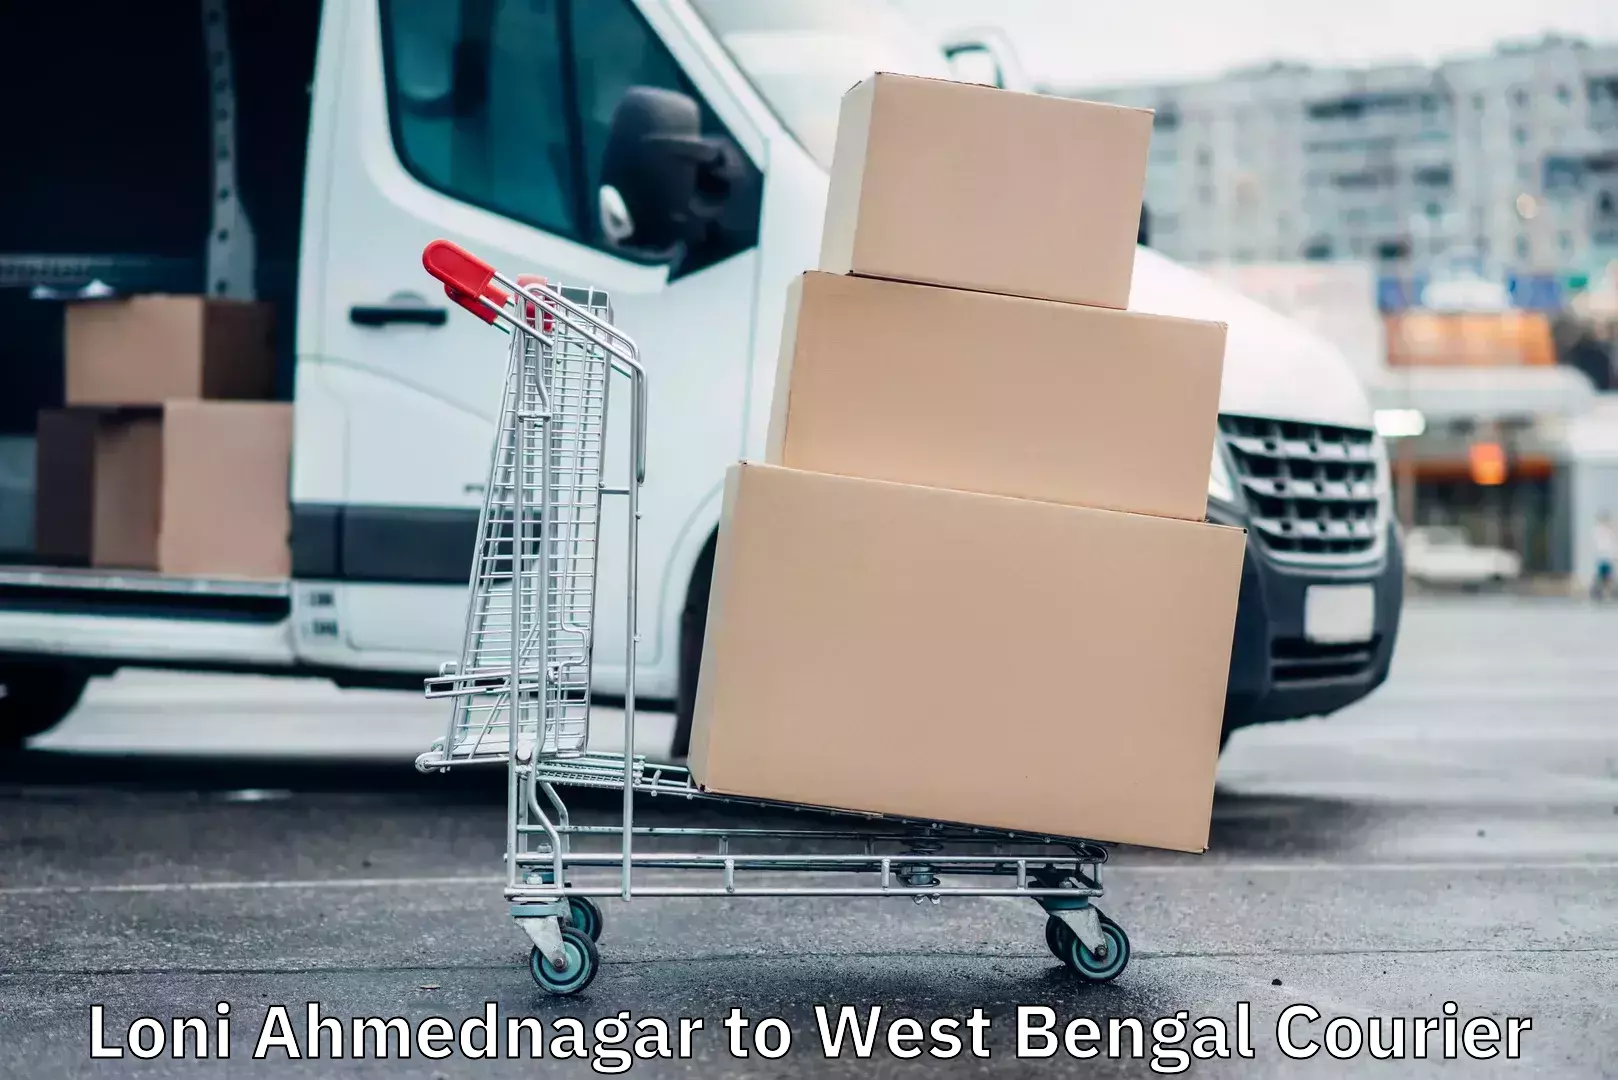 Expedited parcel delivery Loni Ahmednagar to West Bengal